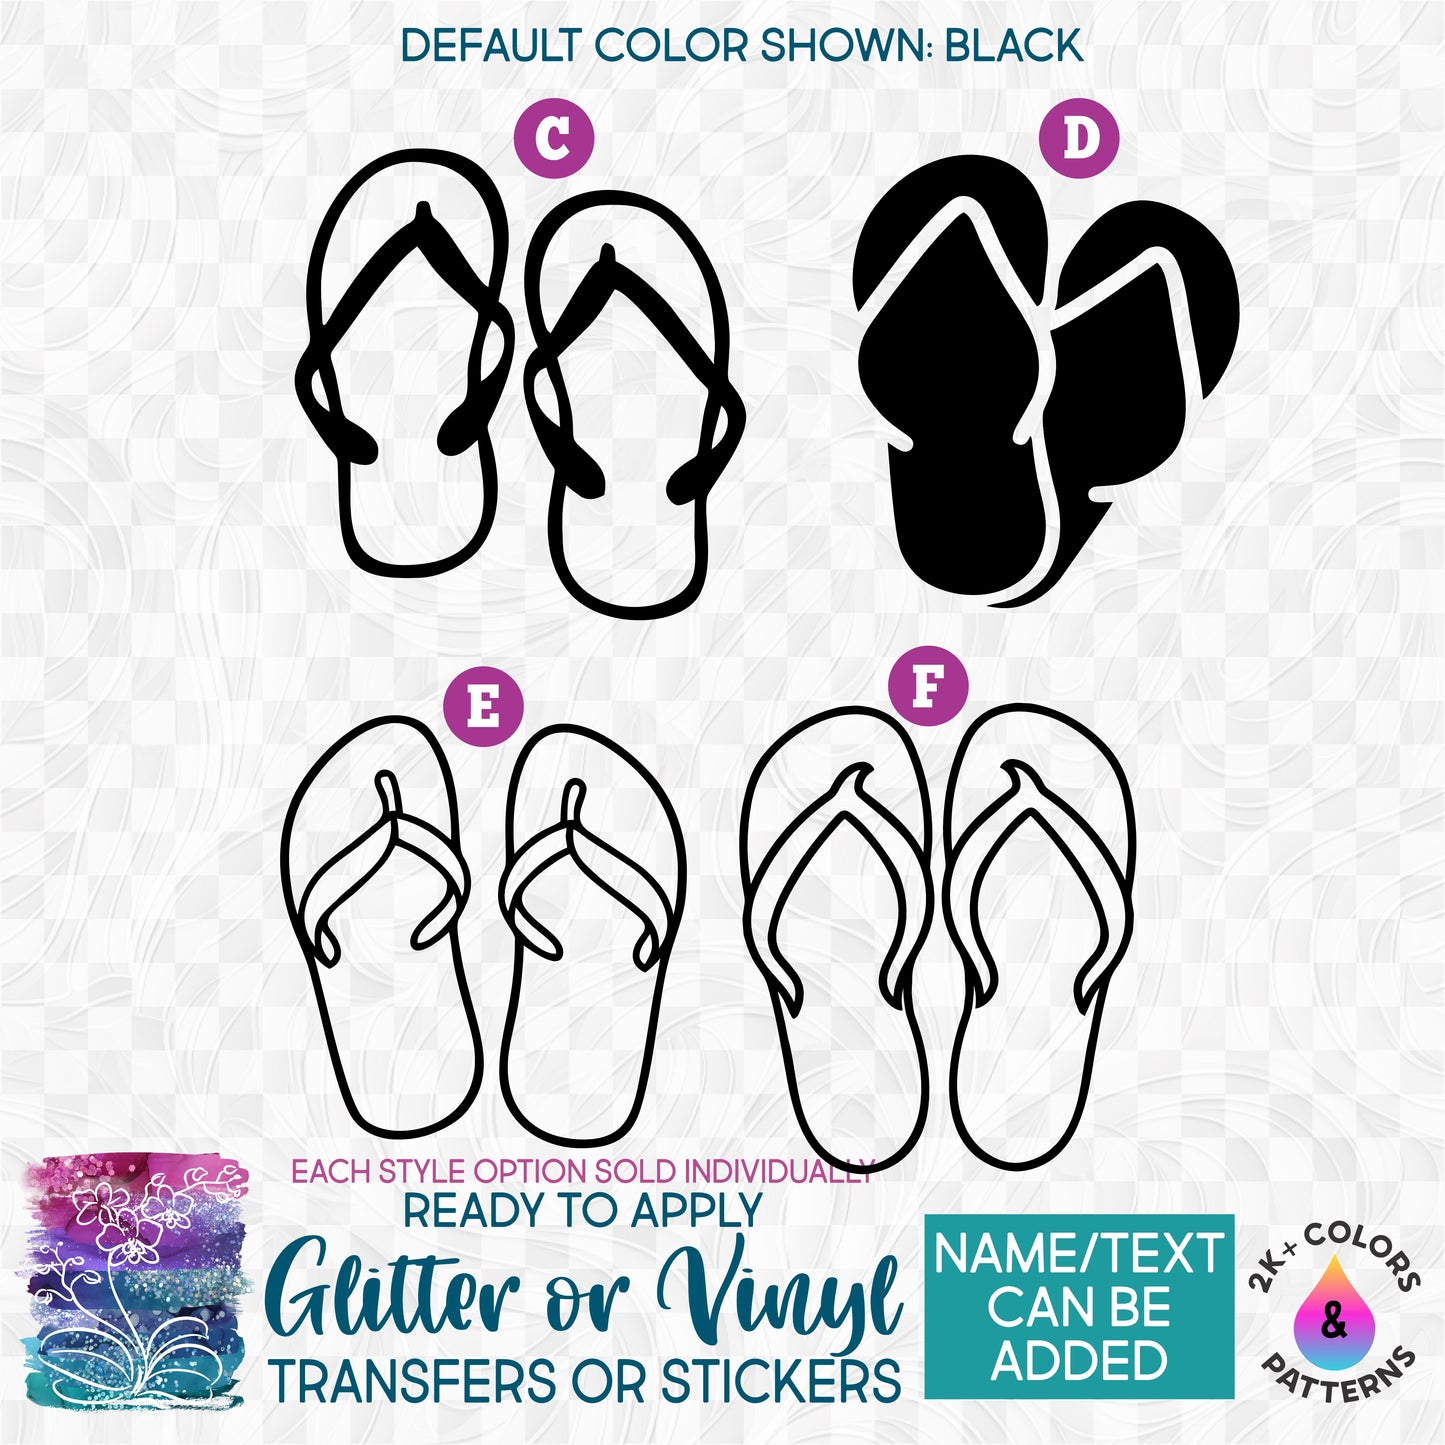 s66-1 Flip Flops Sandals Made-to-Order Iron-On Transfer or Sticker